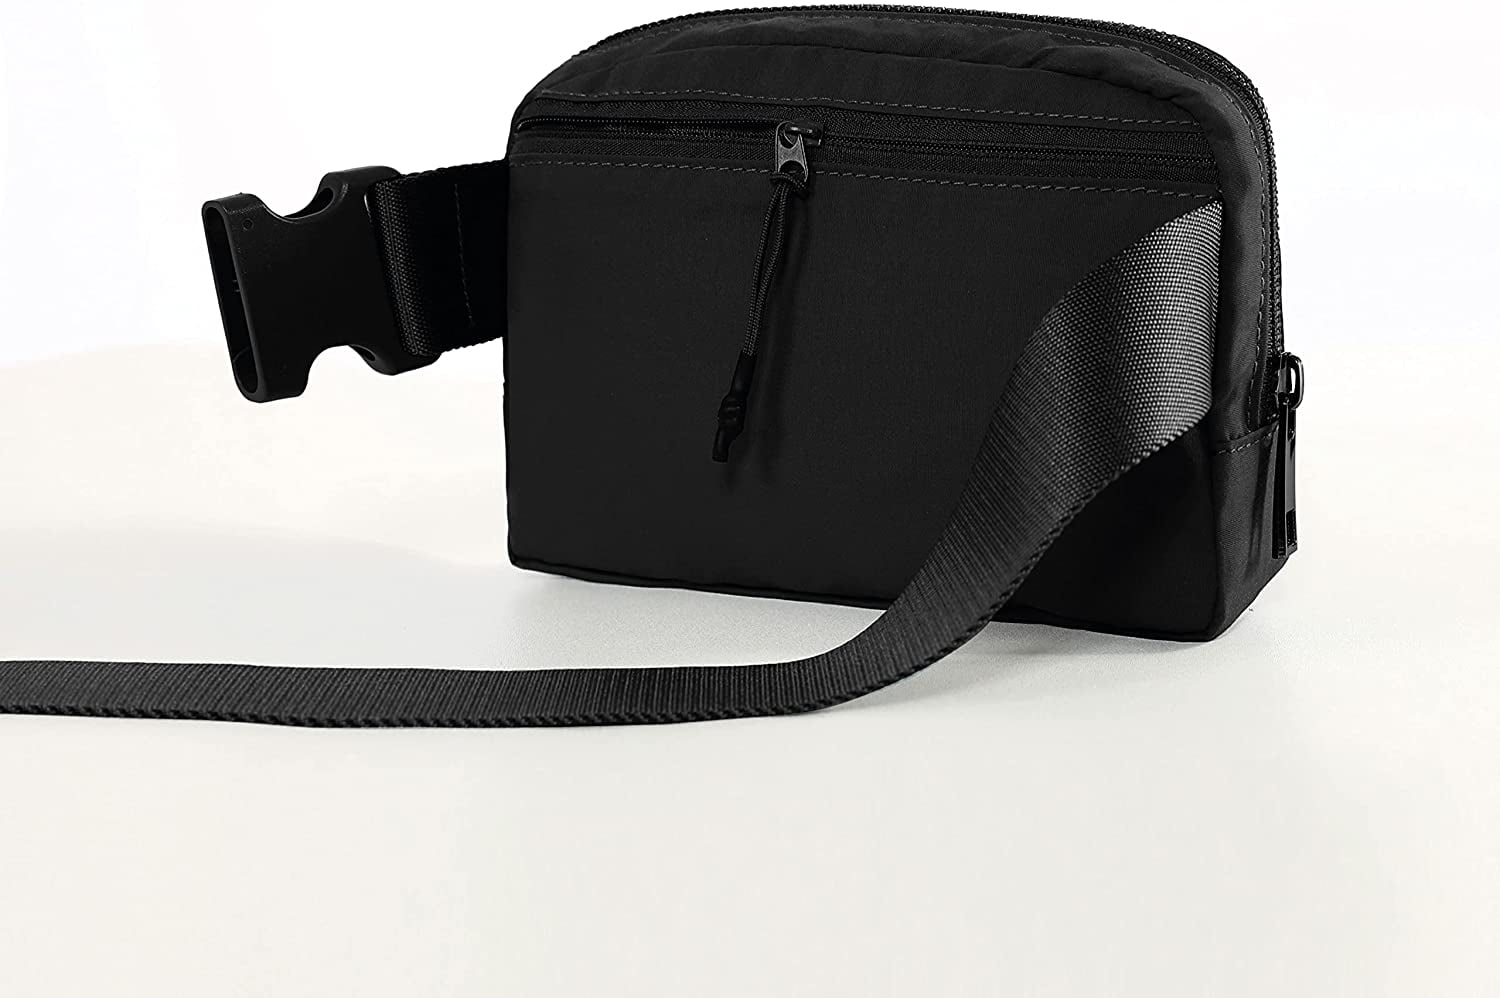 Anywhere Belt Bag with Adjustable Strap Small Waist Pouch for Running  Travelling Hiking Shopping with BONUS Black Key Wallet (Jet Black)